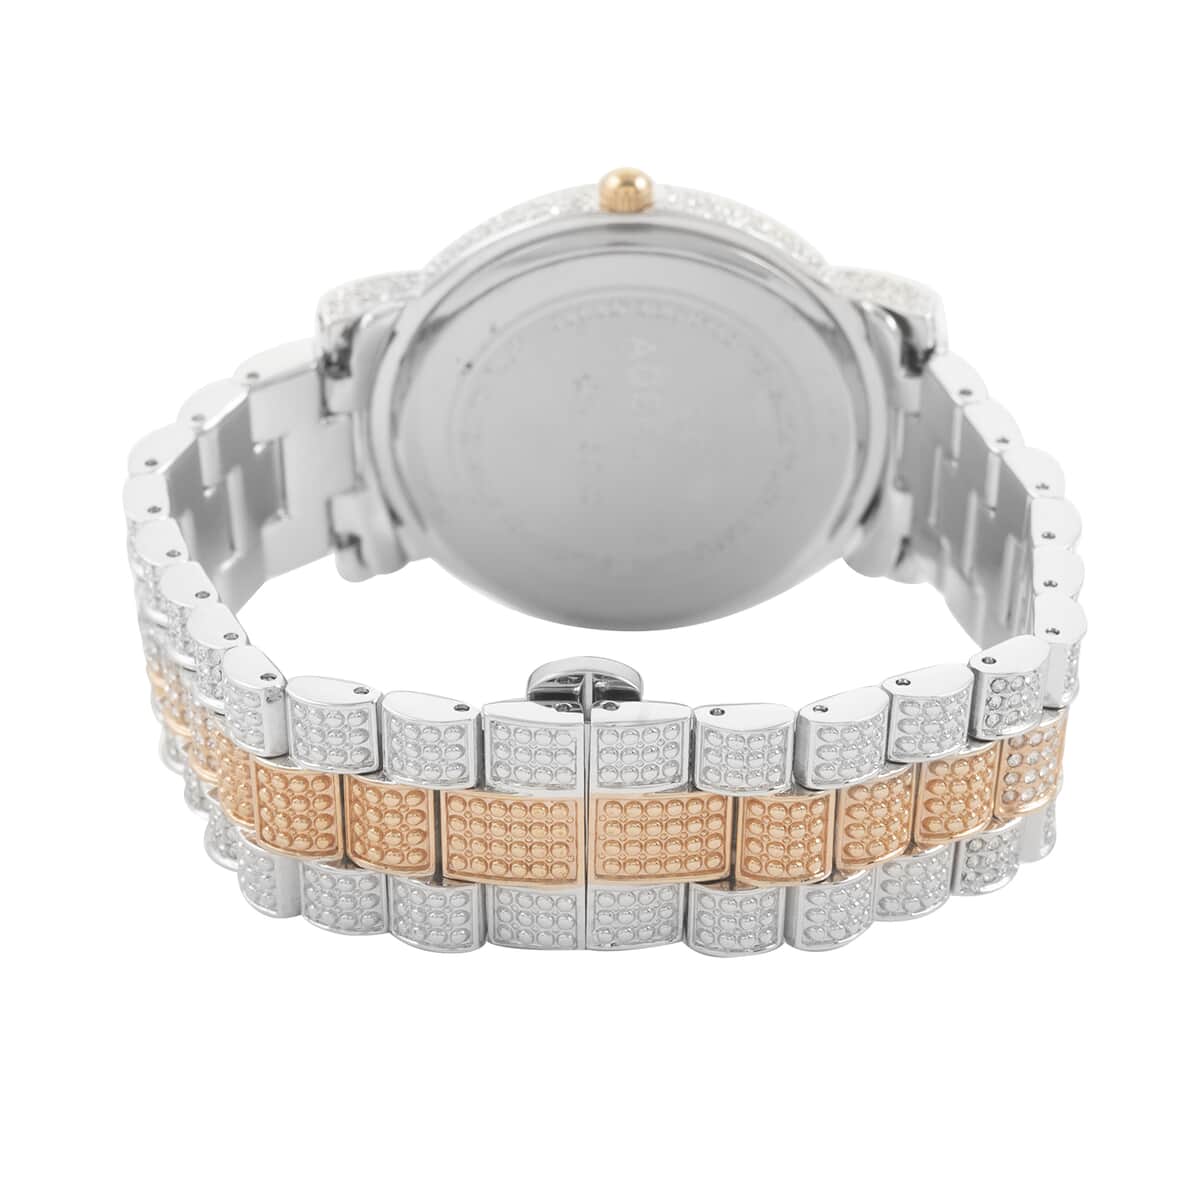 ADEE KAYE Austrian Crystal Japan Quartz Movement Watch in ION Plated RG and Stainless Steel Strap (39 mm) image number 3